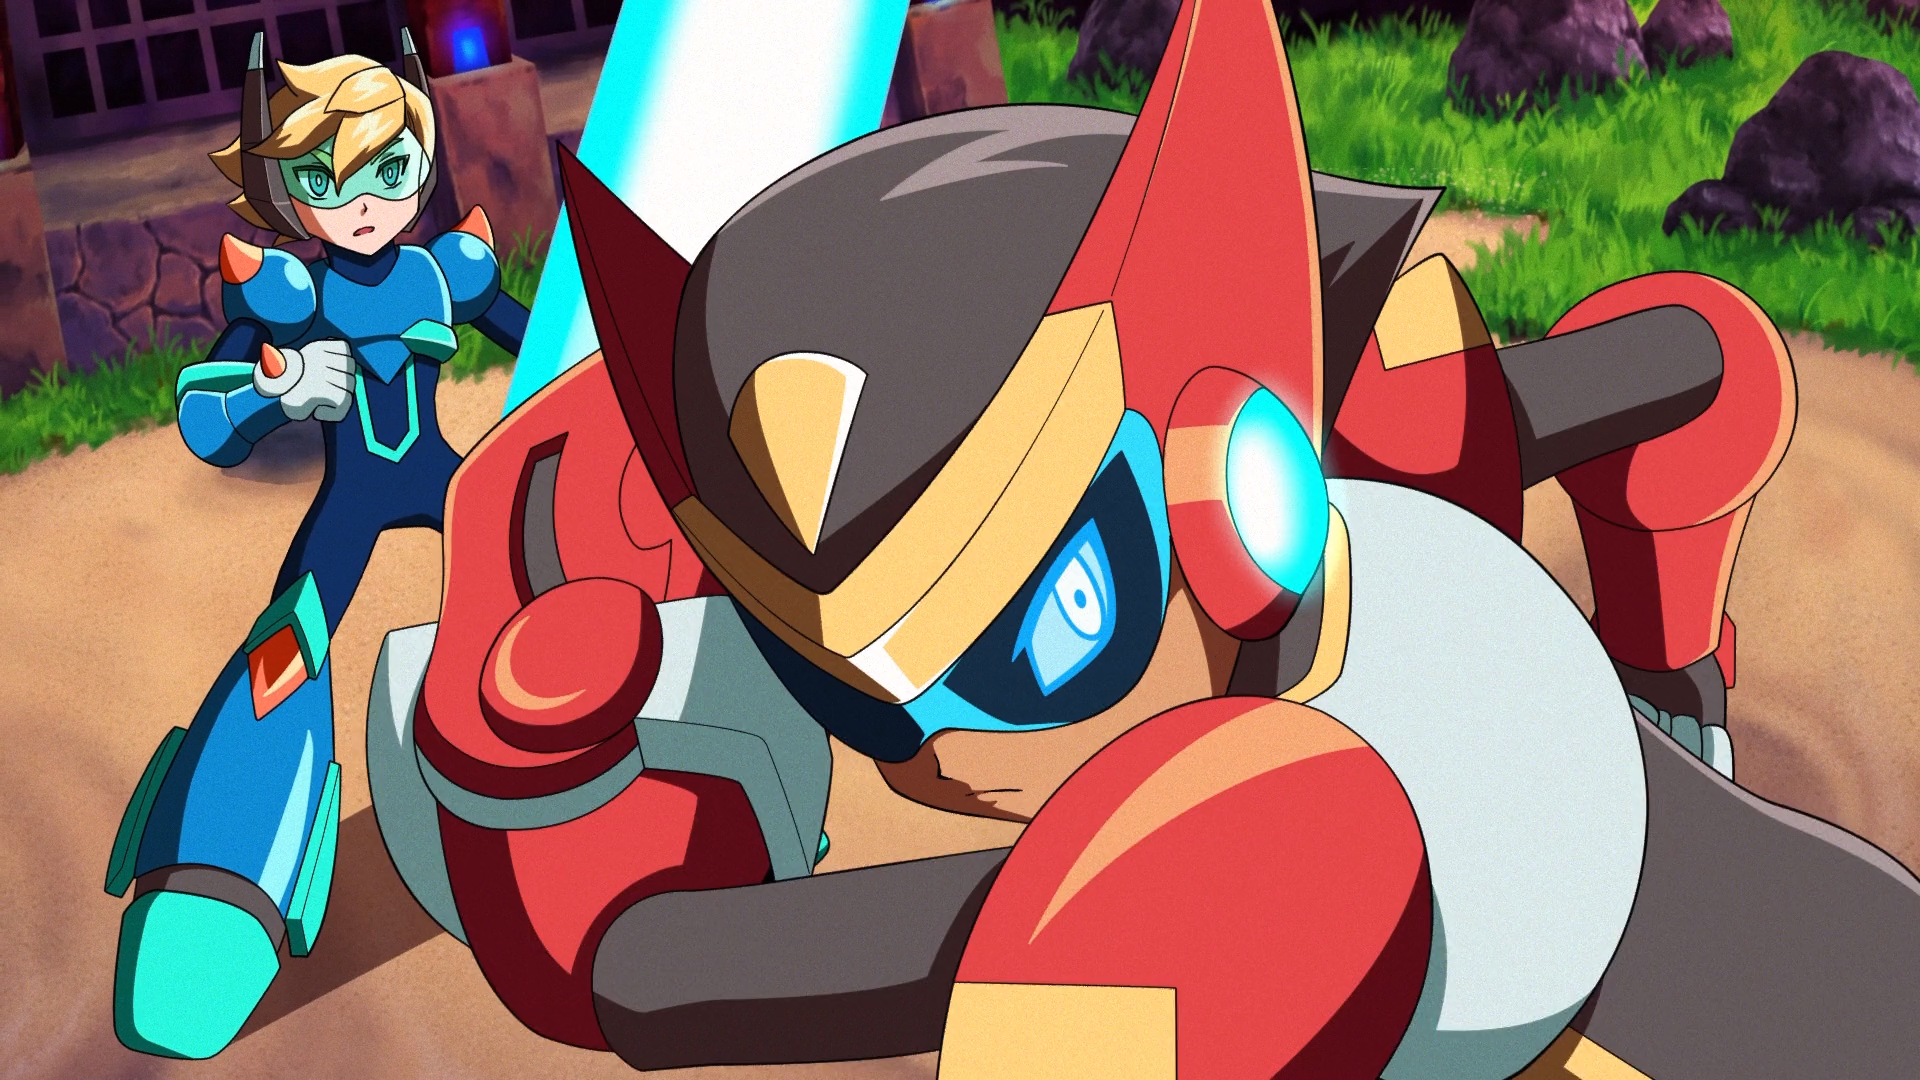 A still from the animated trailer to 30XX, with Ace brandishing a beam-sword in the foreground for defend Nina, who looks on from the background. The stones and gravel and grass of the Burning Temple surround them, with a single lantern glowing eerie blue.